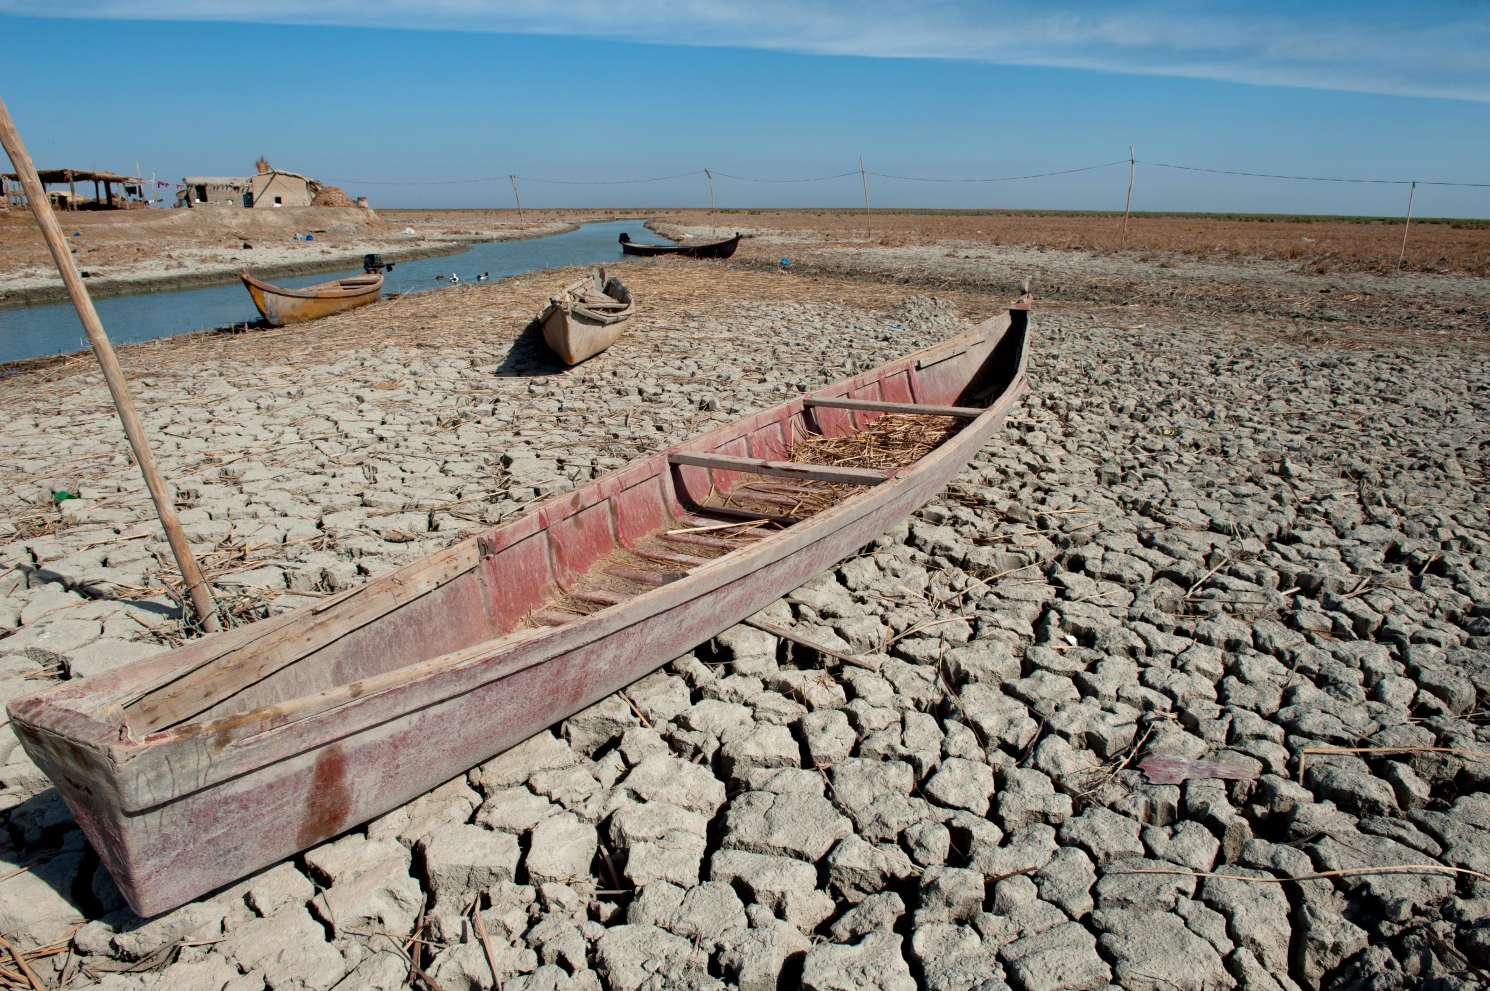 Euphrates river dried up 